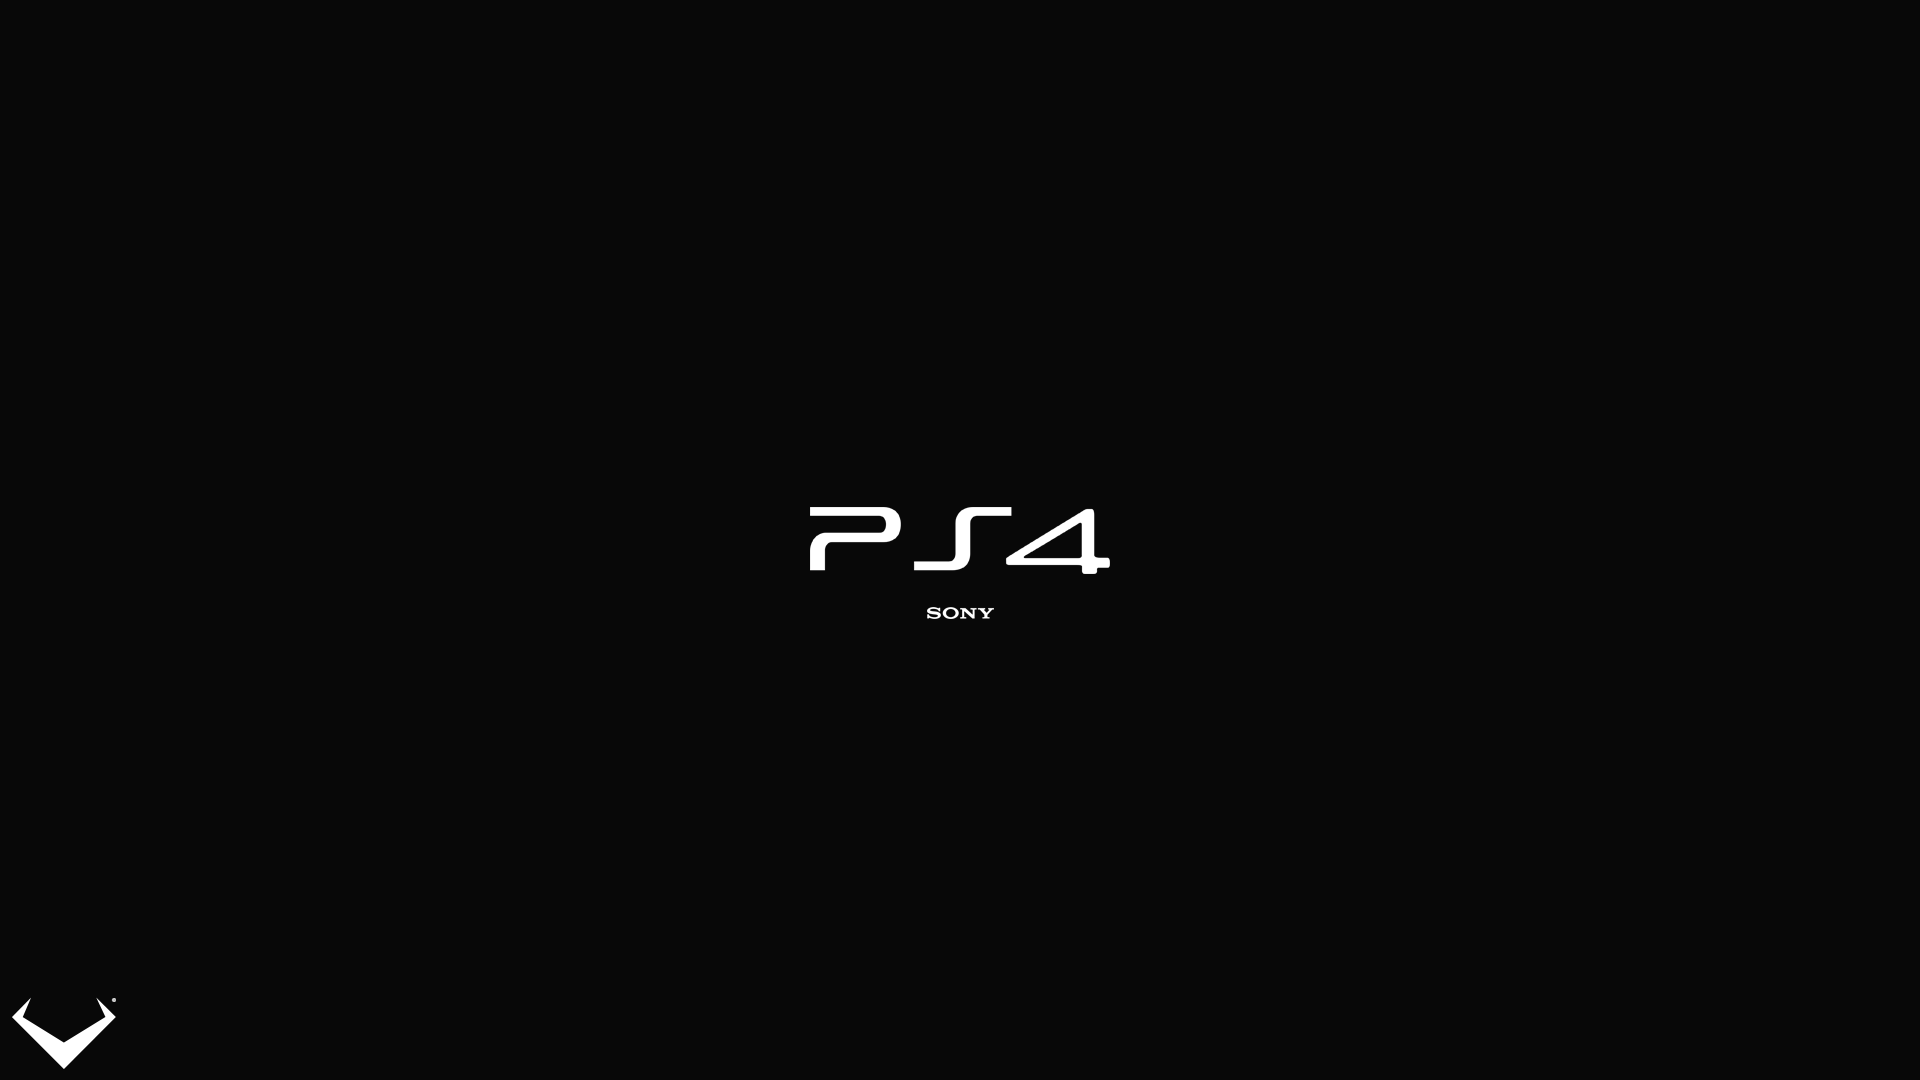 Playstation 4 Wallpapers